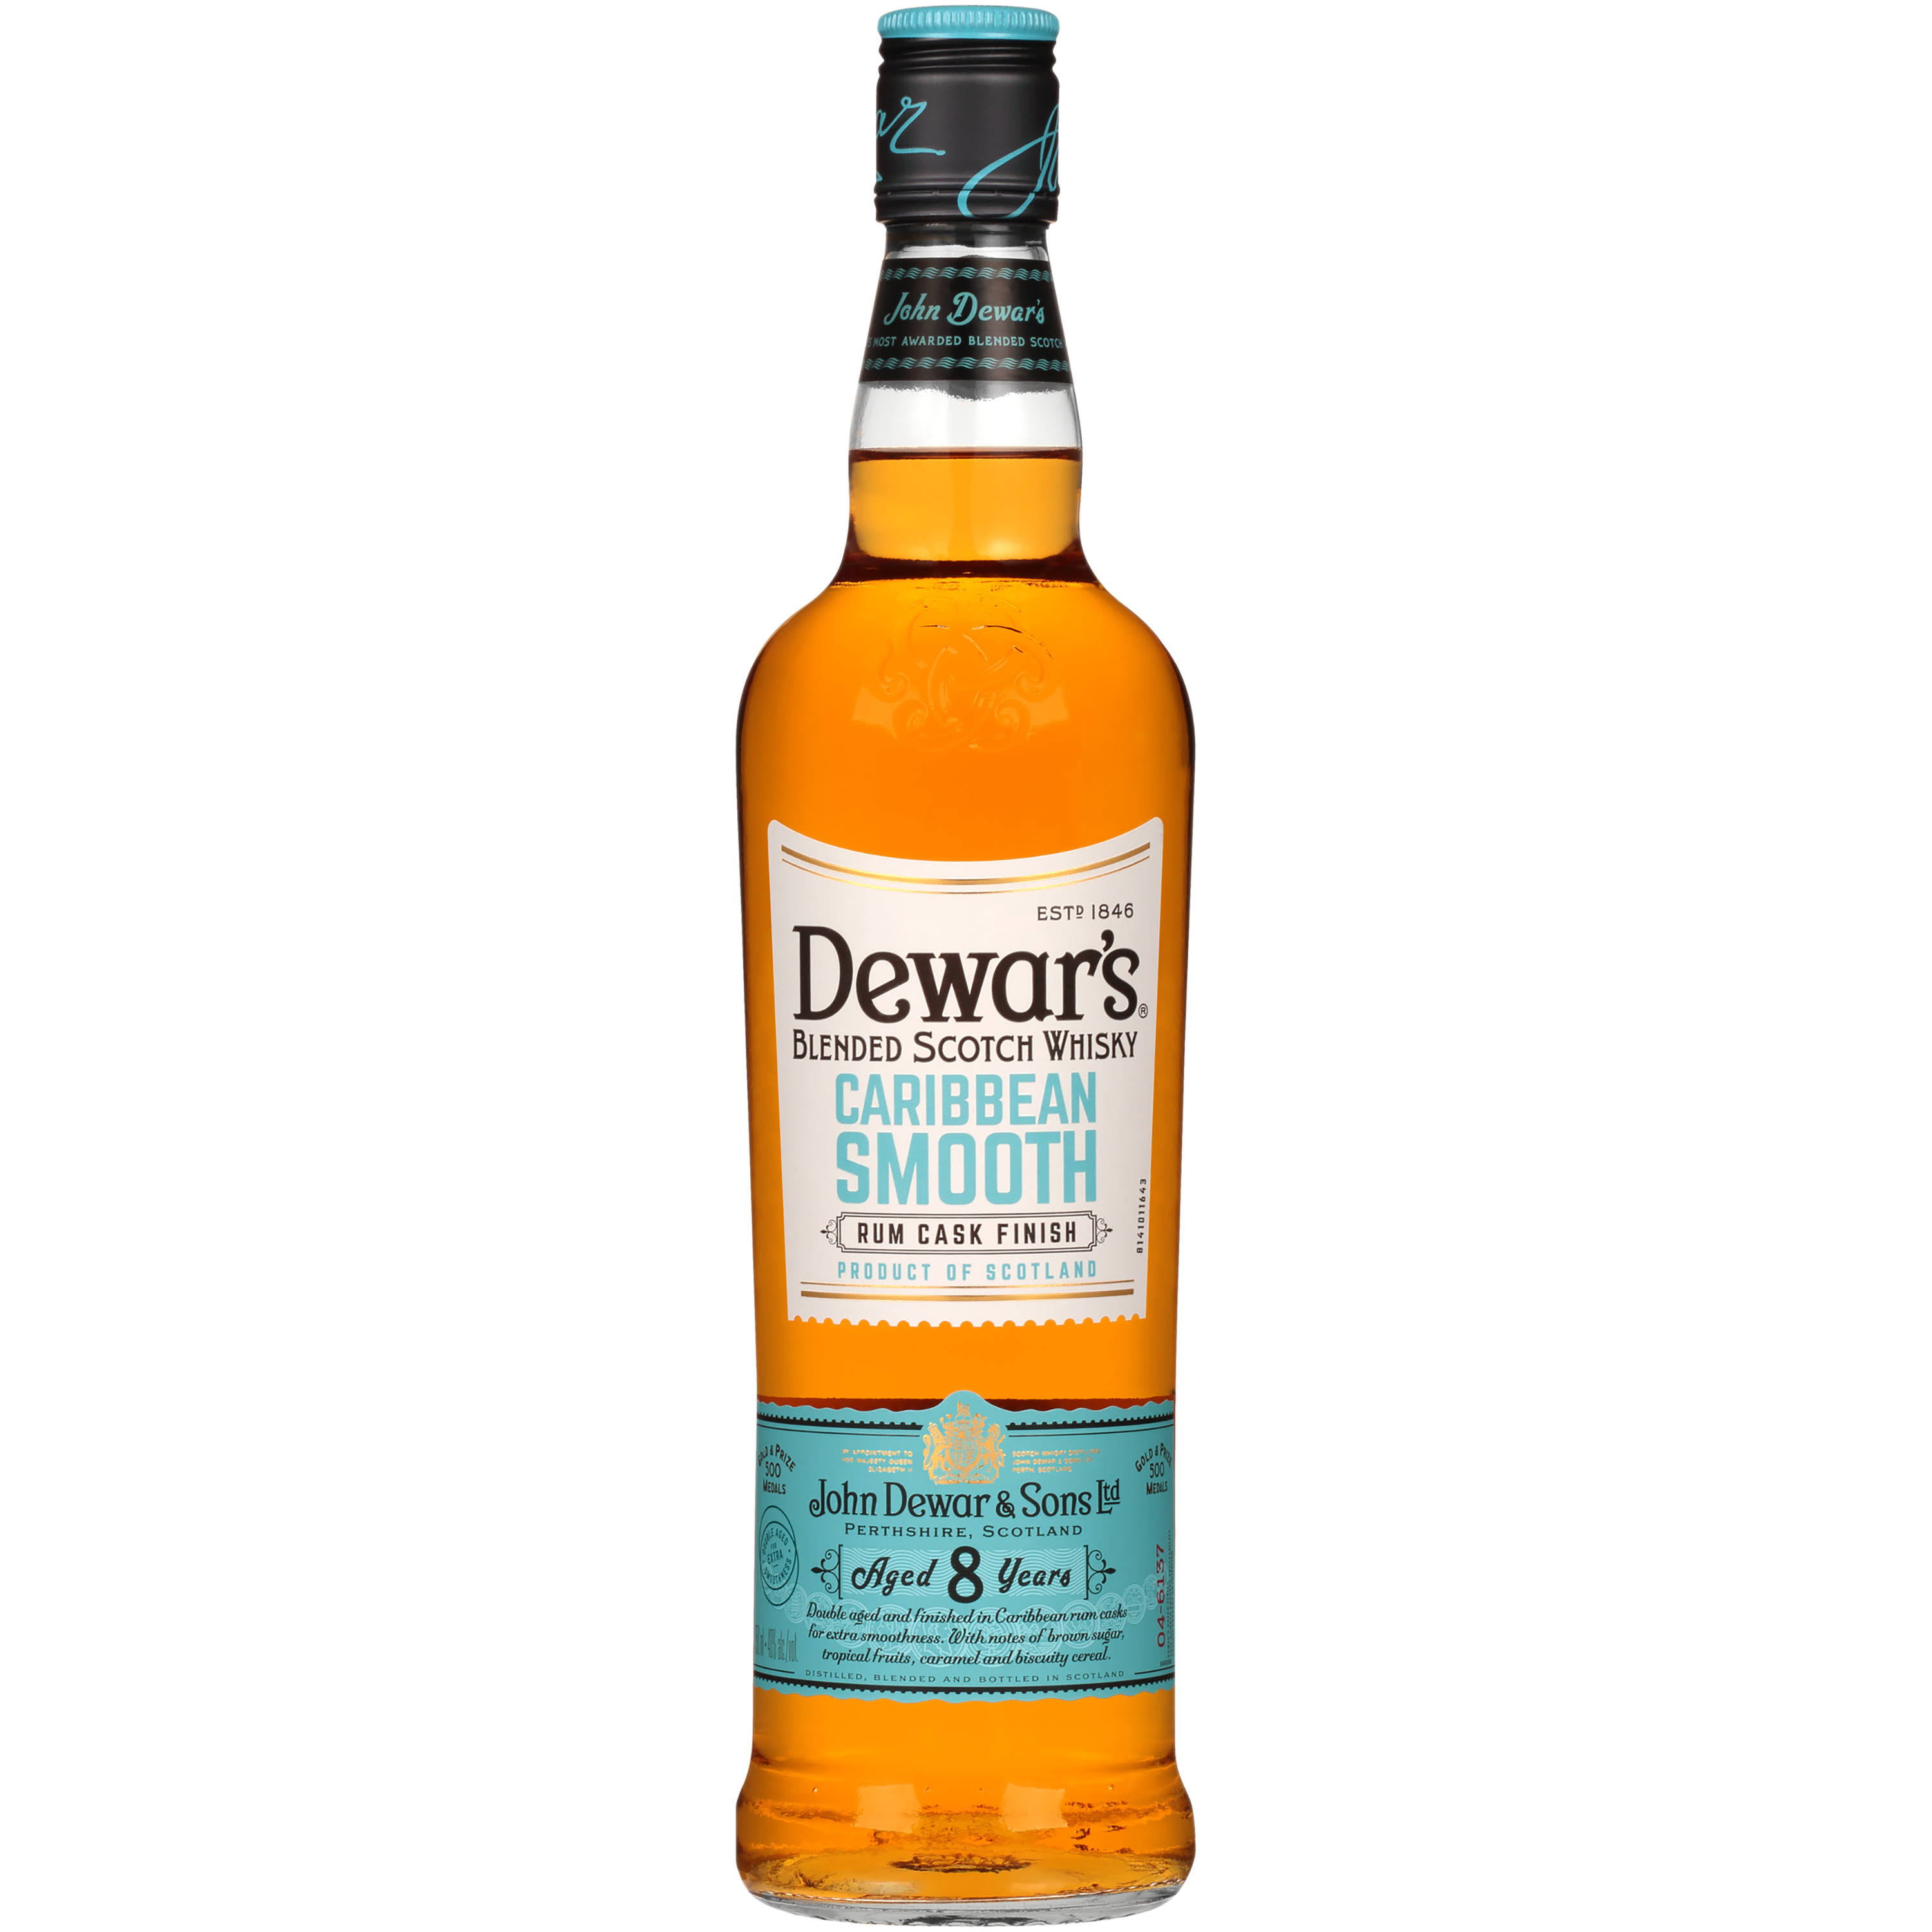 Dewar's 8 Year Caribbean Smooth Rum Cask Finish Blended Scotch Whisky 750ml